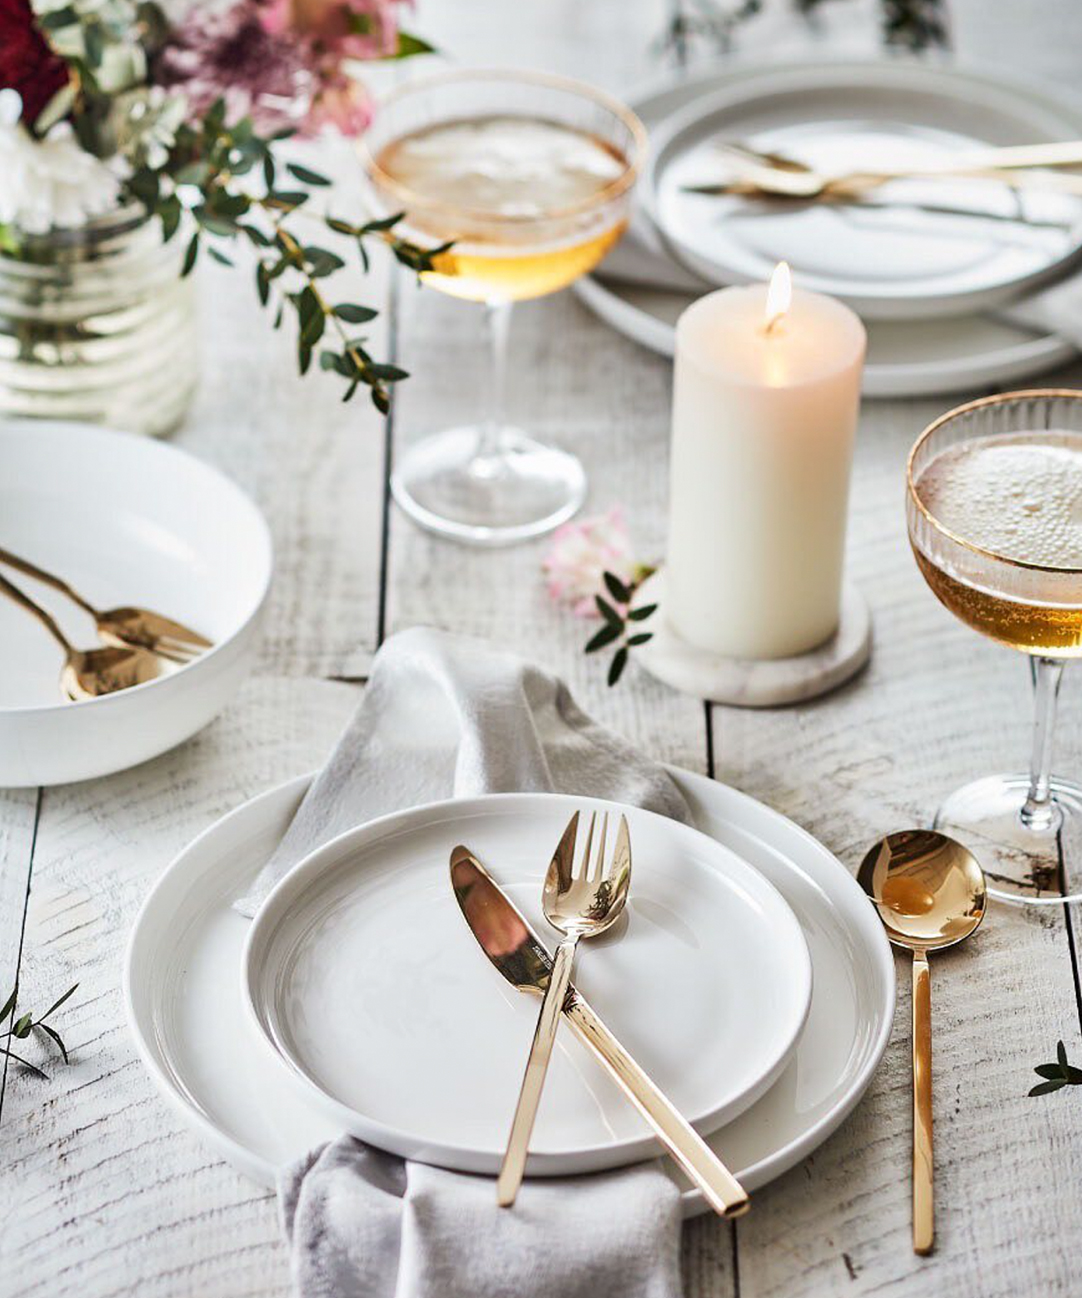 Crate and Barrel Table setting